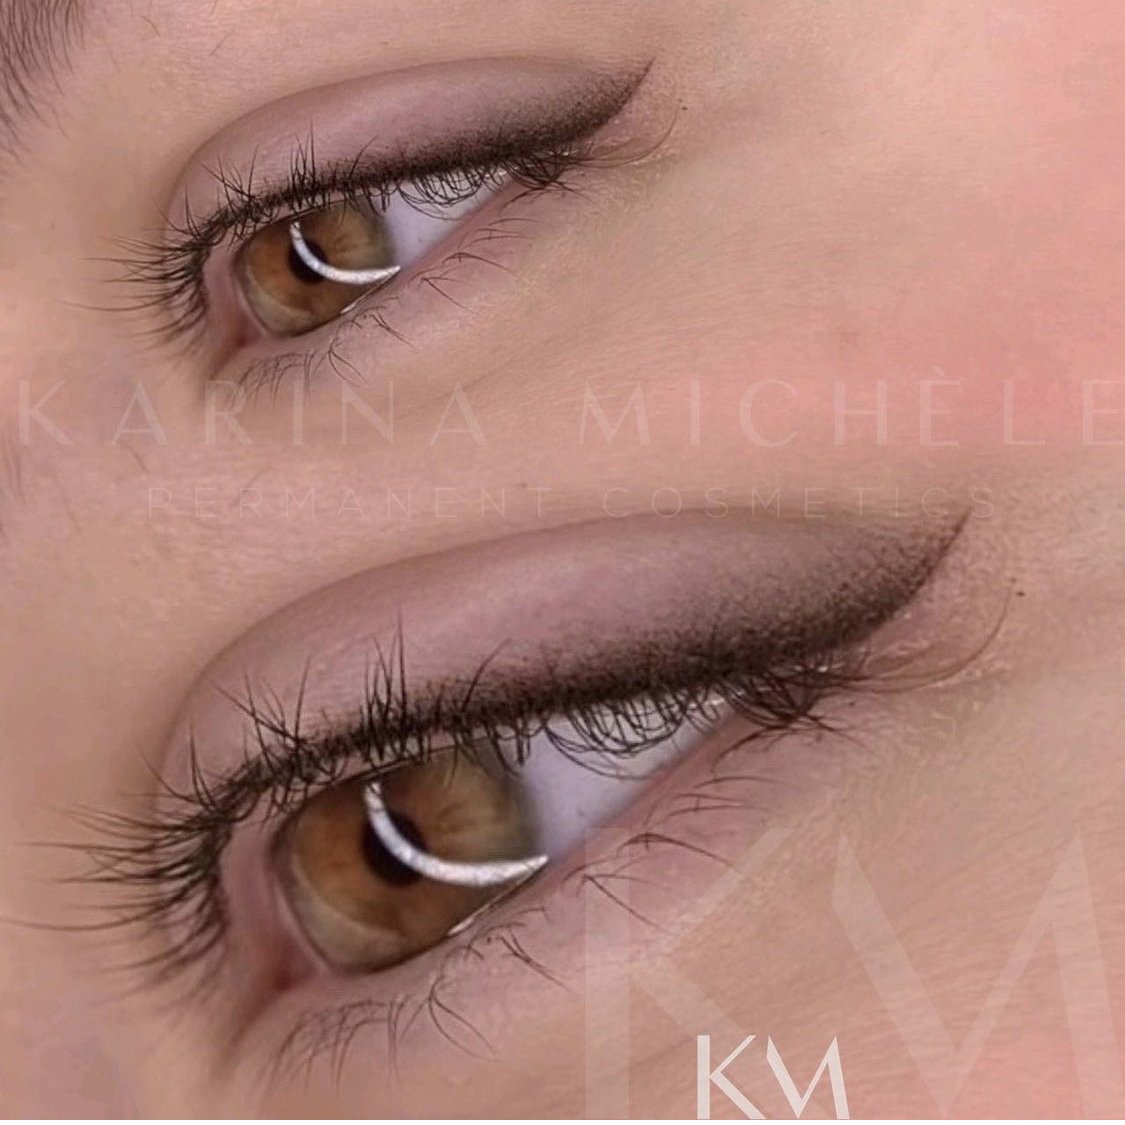 Permanent Eyeliner Milltown New Jersey | Eyeliner Professional Milltown New  Jersey - PERMANENT MAKE UP NJ | MICROBLADING NEW JERSEY